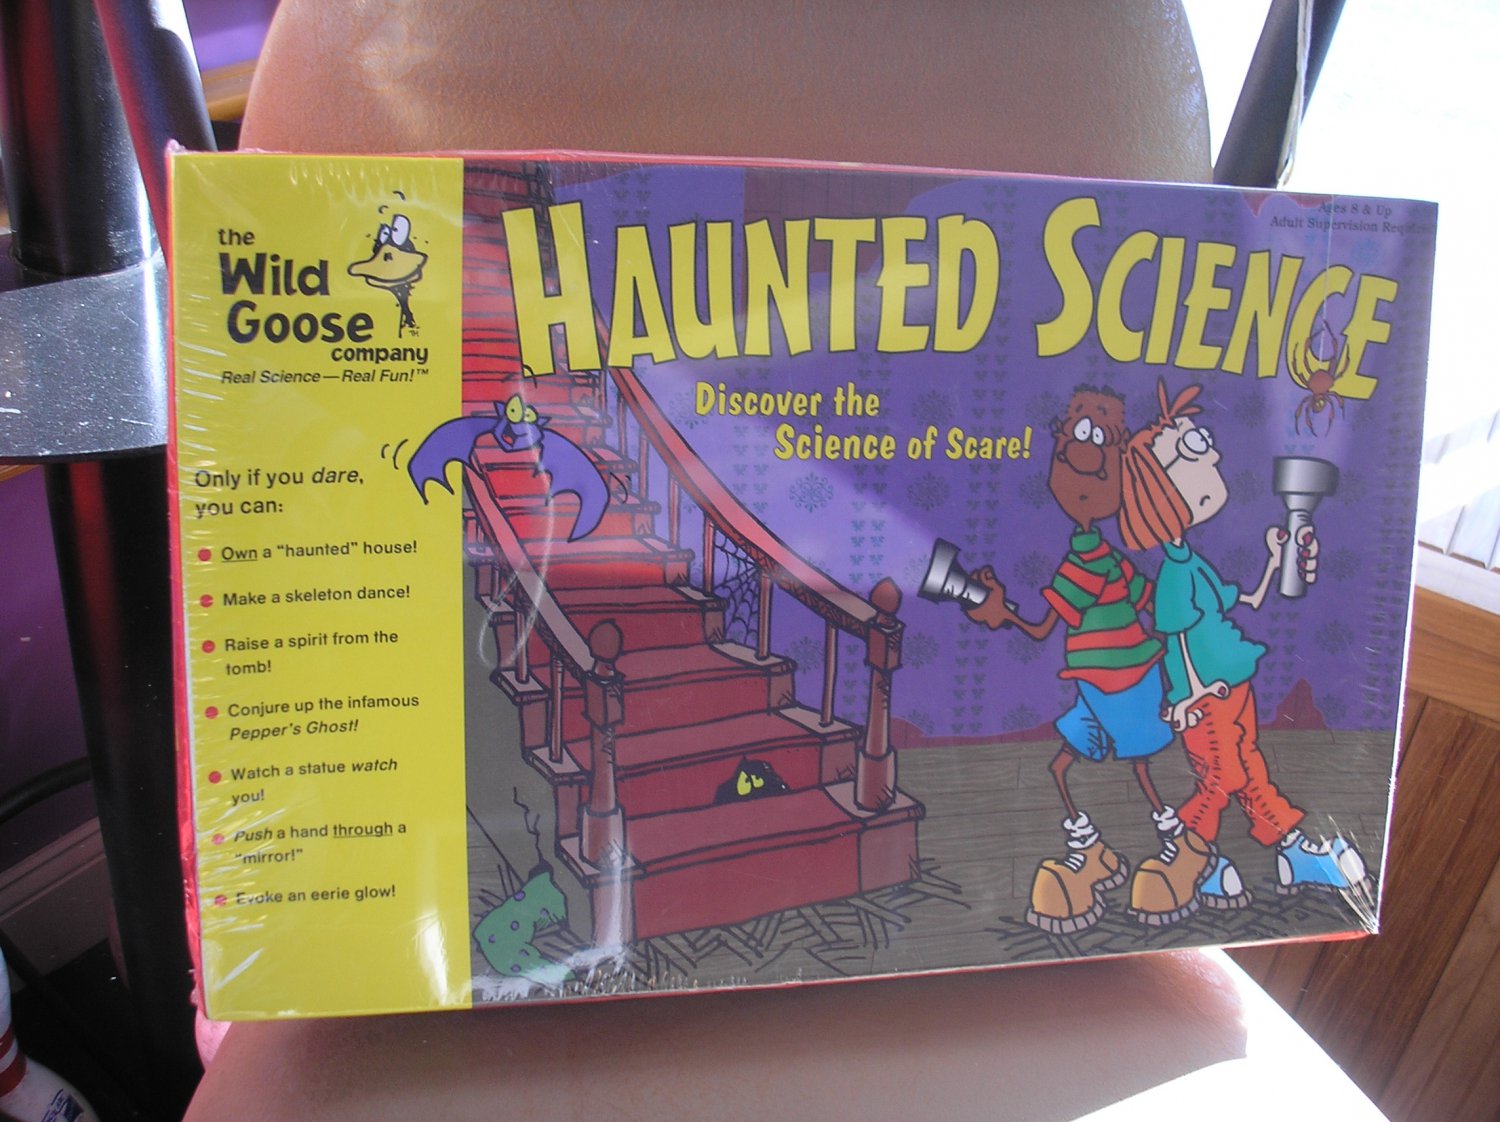 HAUNTED SCIENCE DISCOVER THE SCIENCE OF SCARE! by WILD GOOSE COMPANY